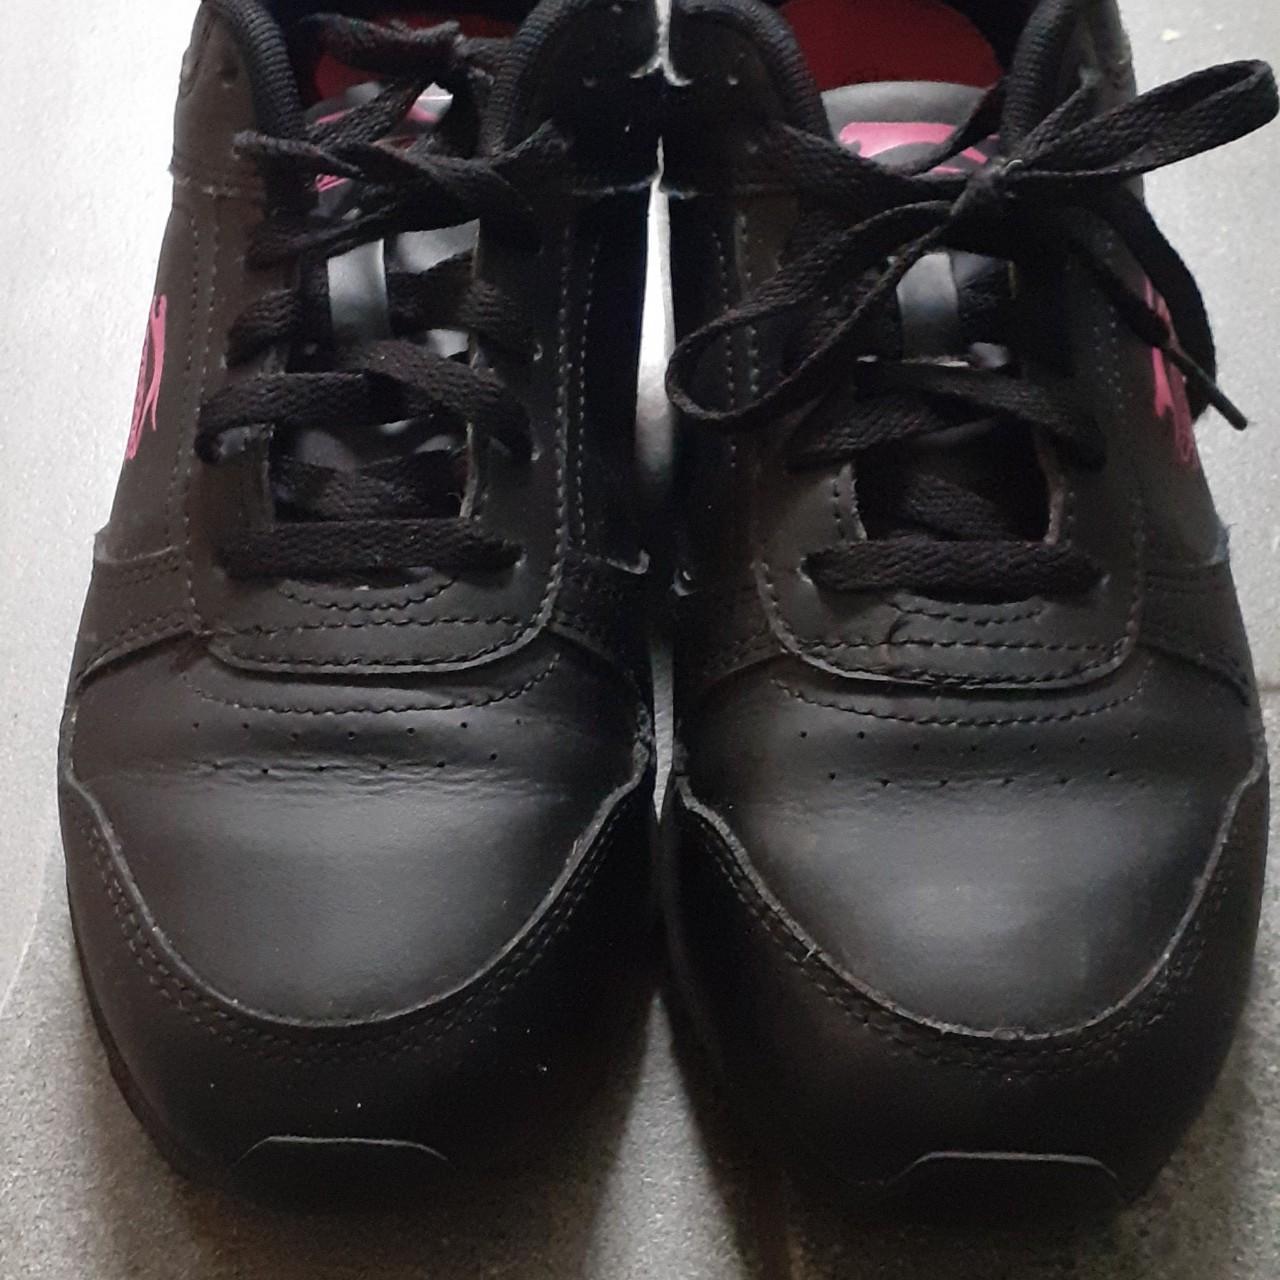 black and pink slazenger trainers, great condition,... - Depop